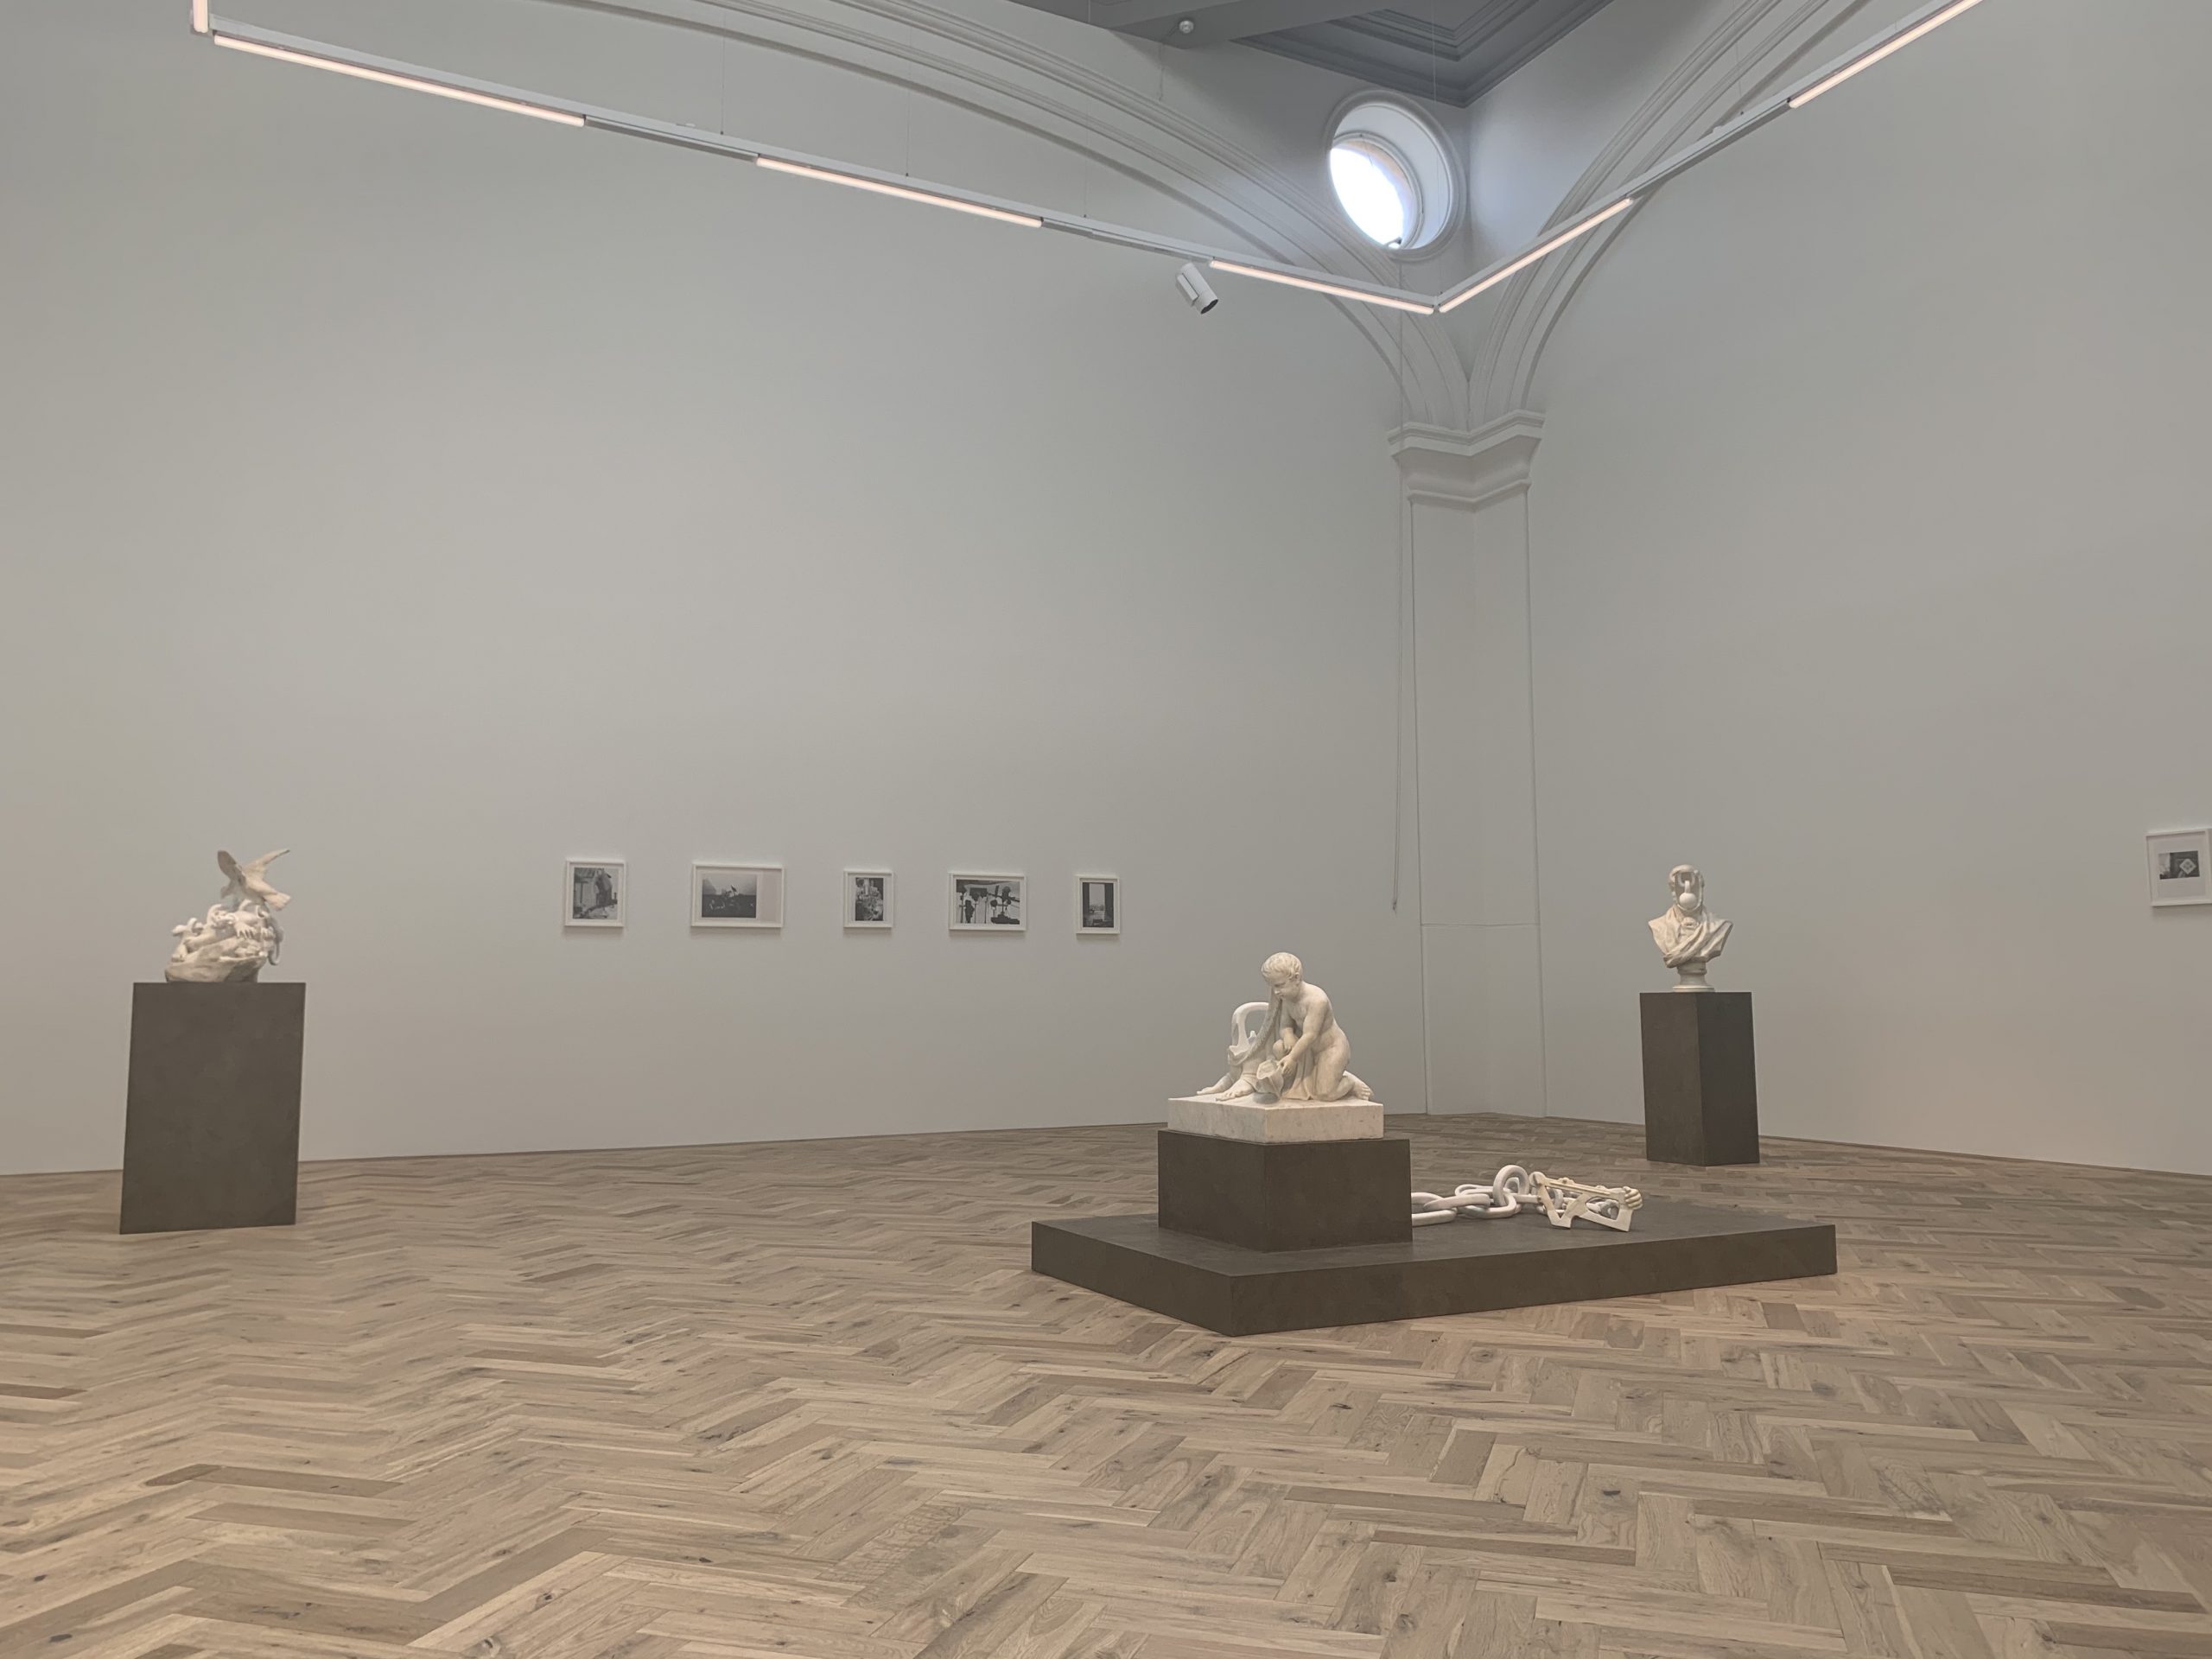 Exhibition space with white wall and wooden floor. In the middle of the room over three plinth there are three white marble sculptures. On the wall five drawings are framed